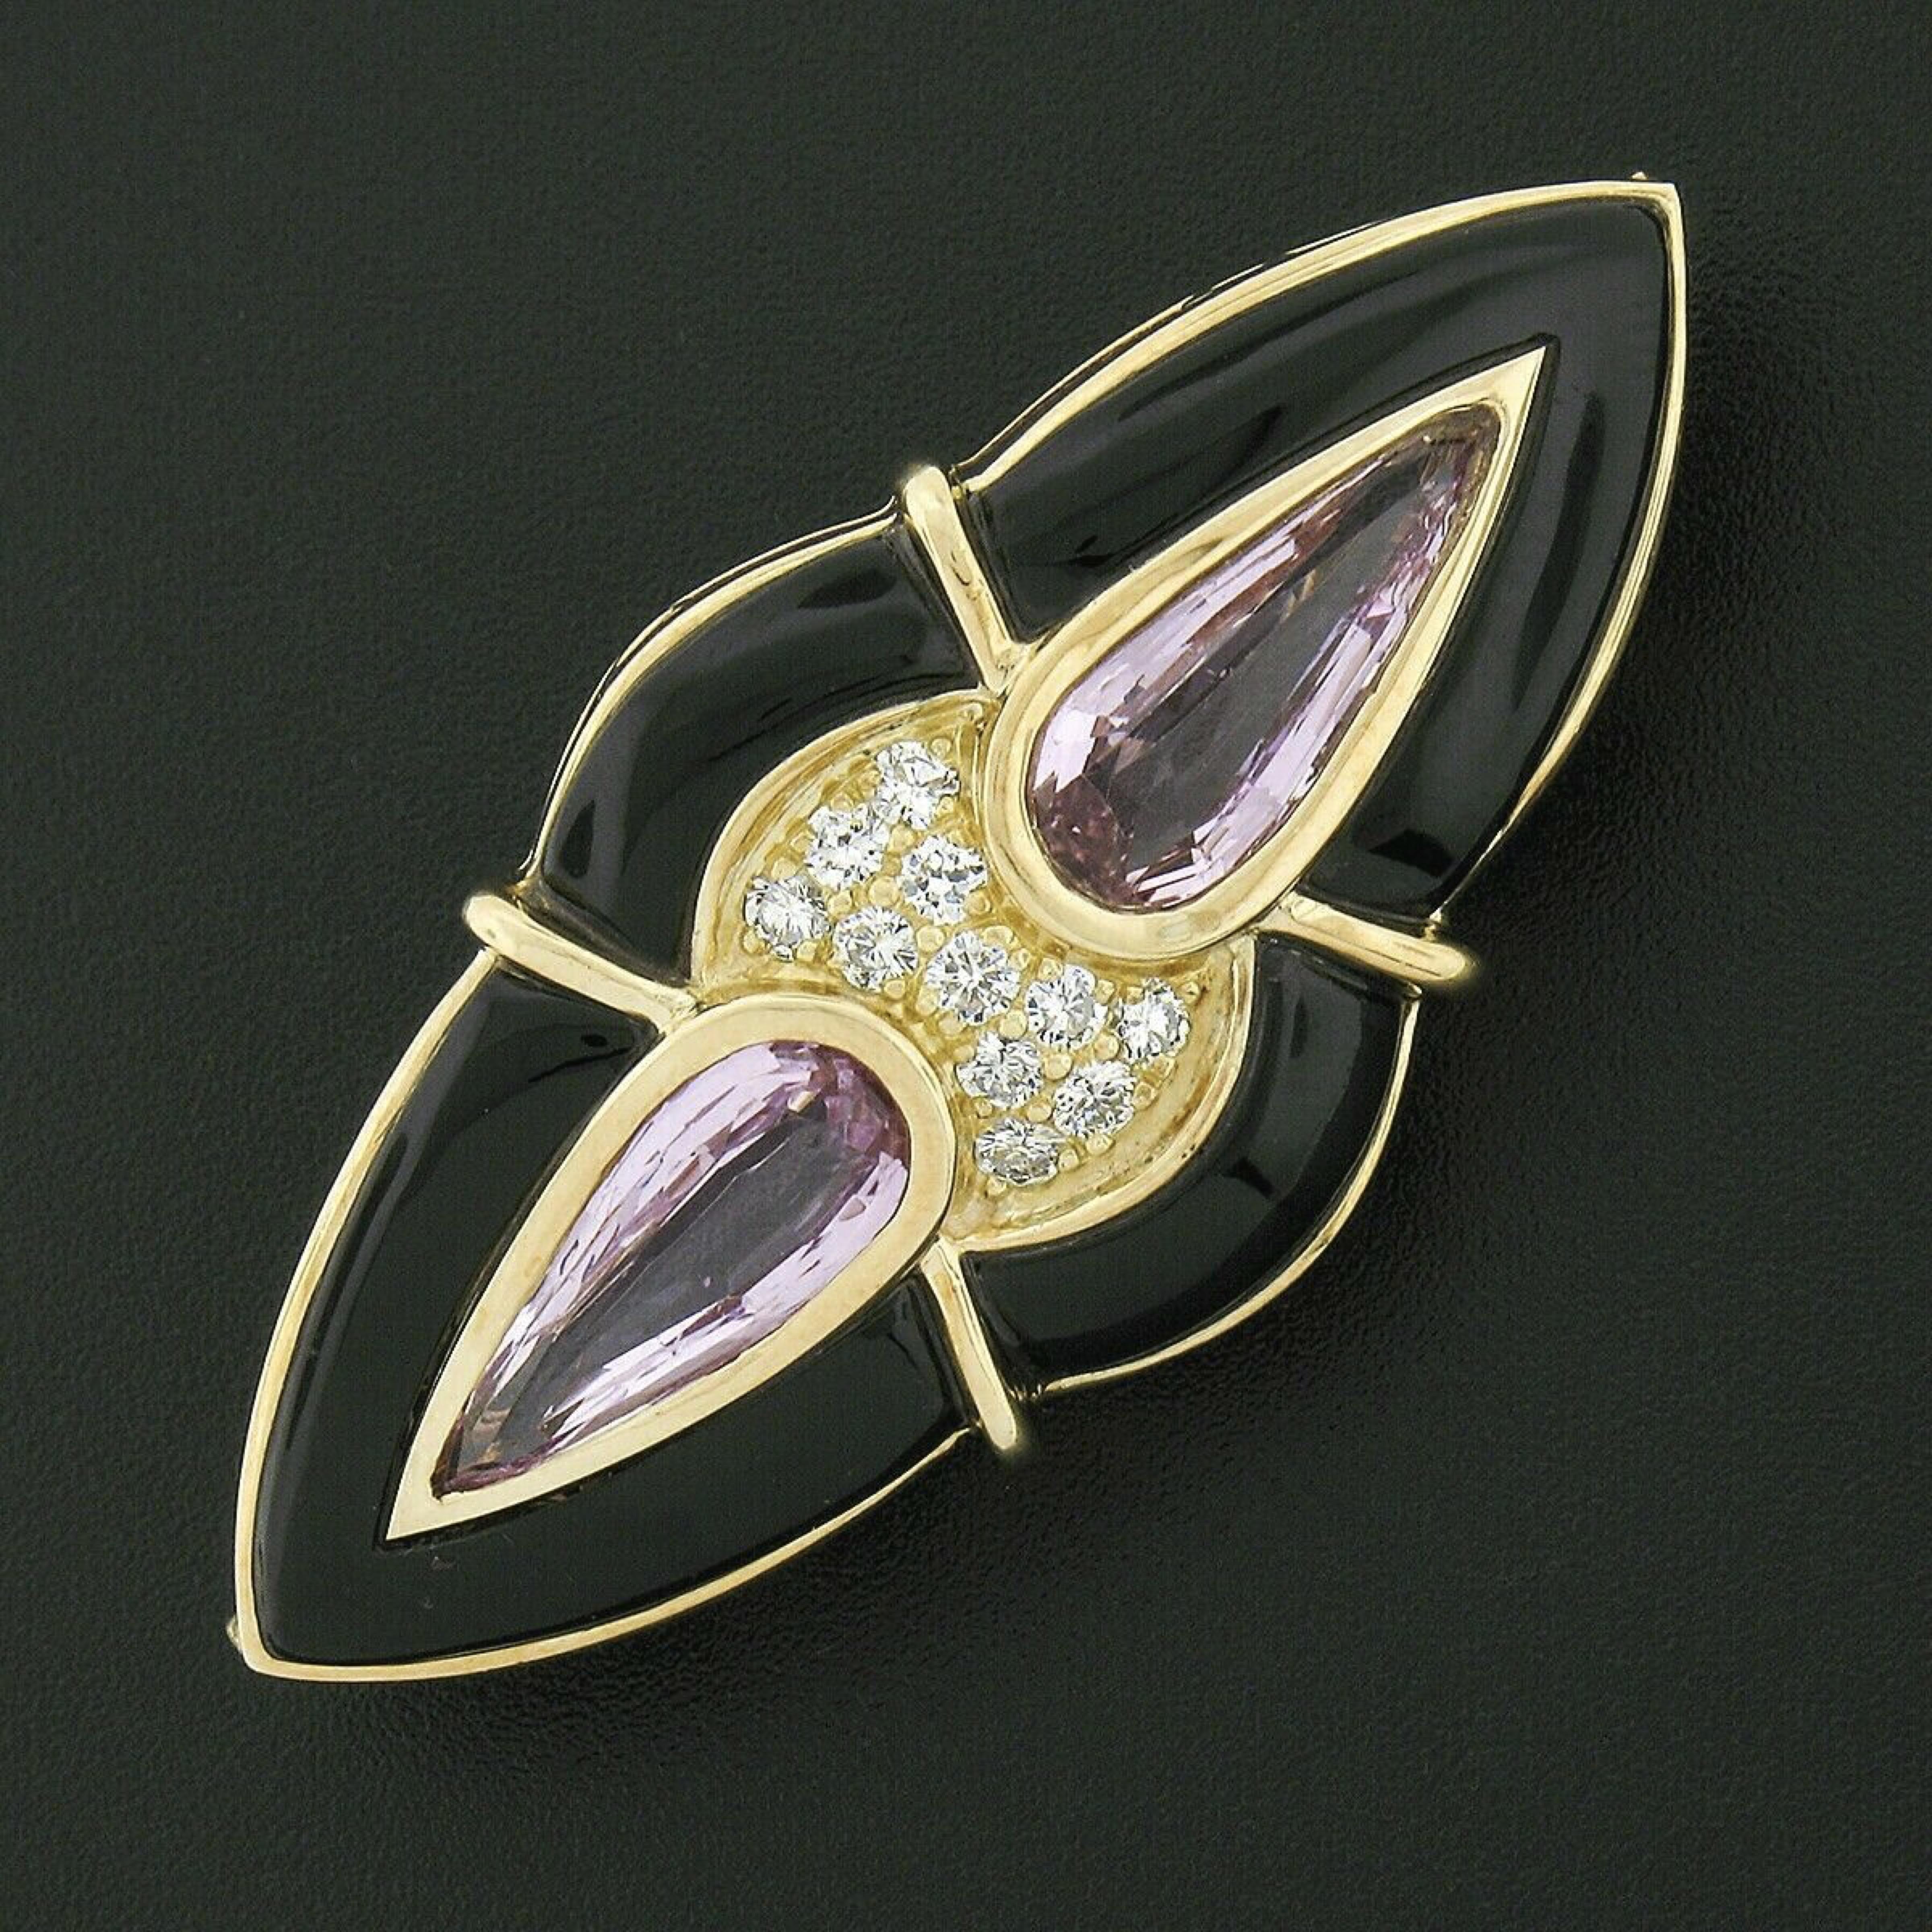 You are looking at a simply marvelous vintage pin brooch crafted from solid 14k yellow gold. It features an elegant design neatly bezel set with two elongated pear pink topaz stones accented with TOP QUALITY diamonds pave set in between the stones